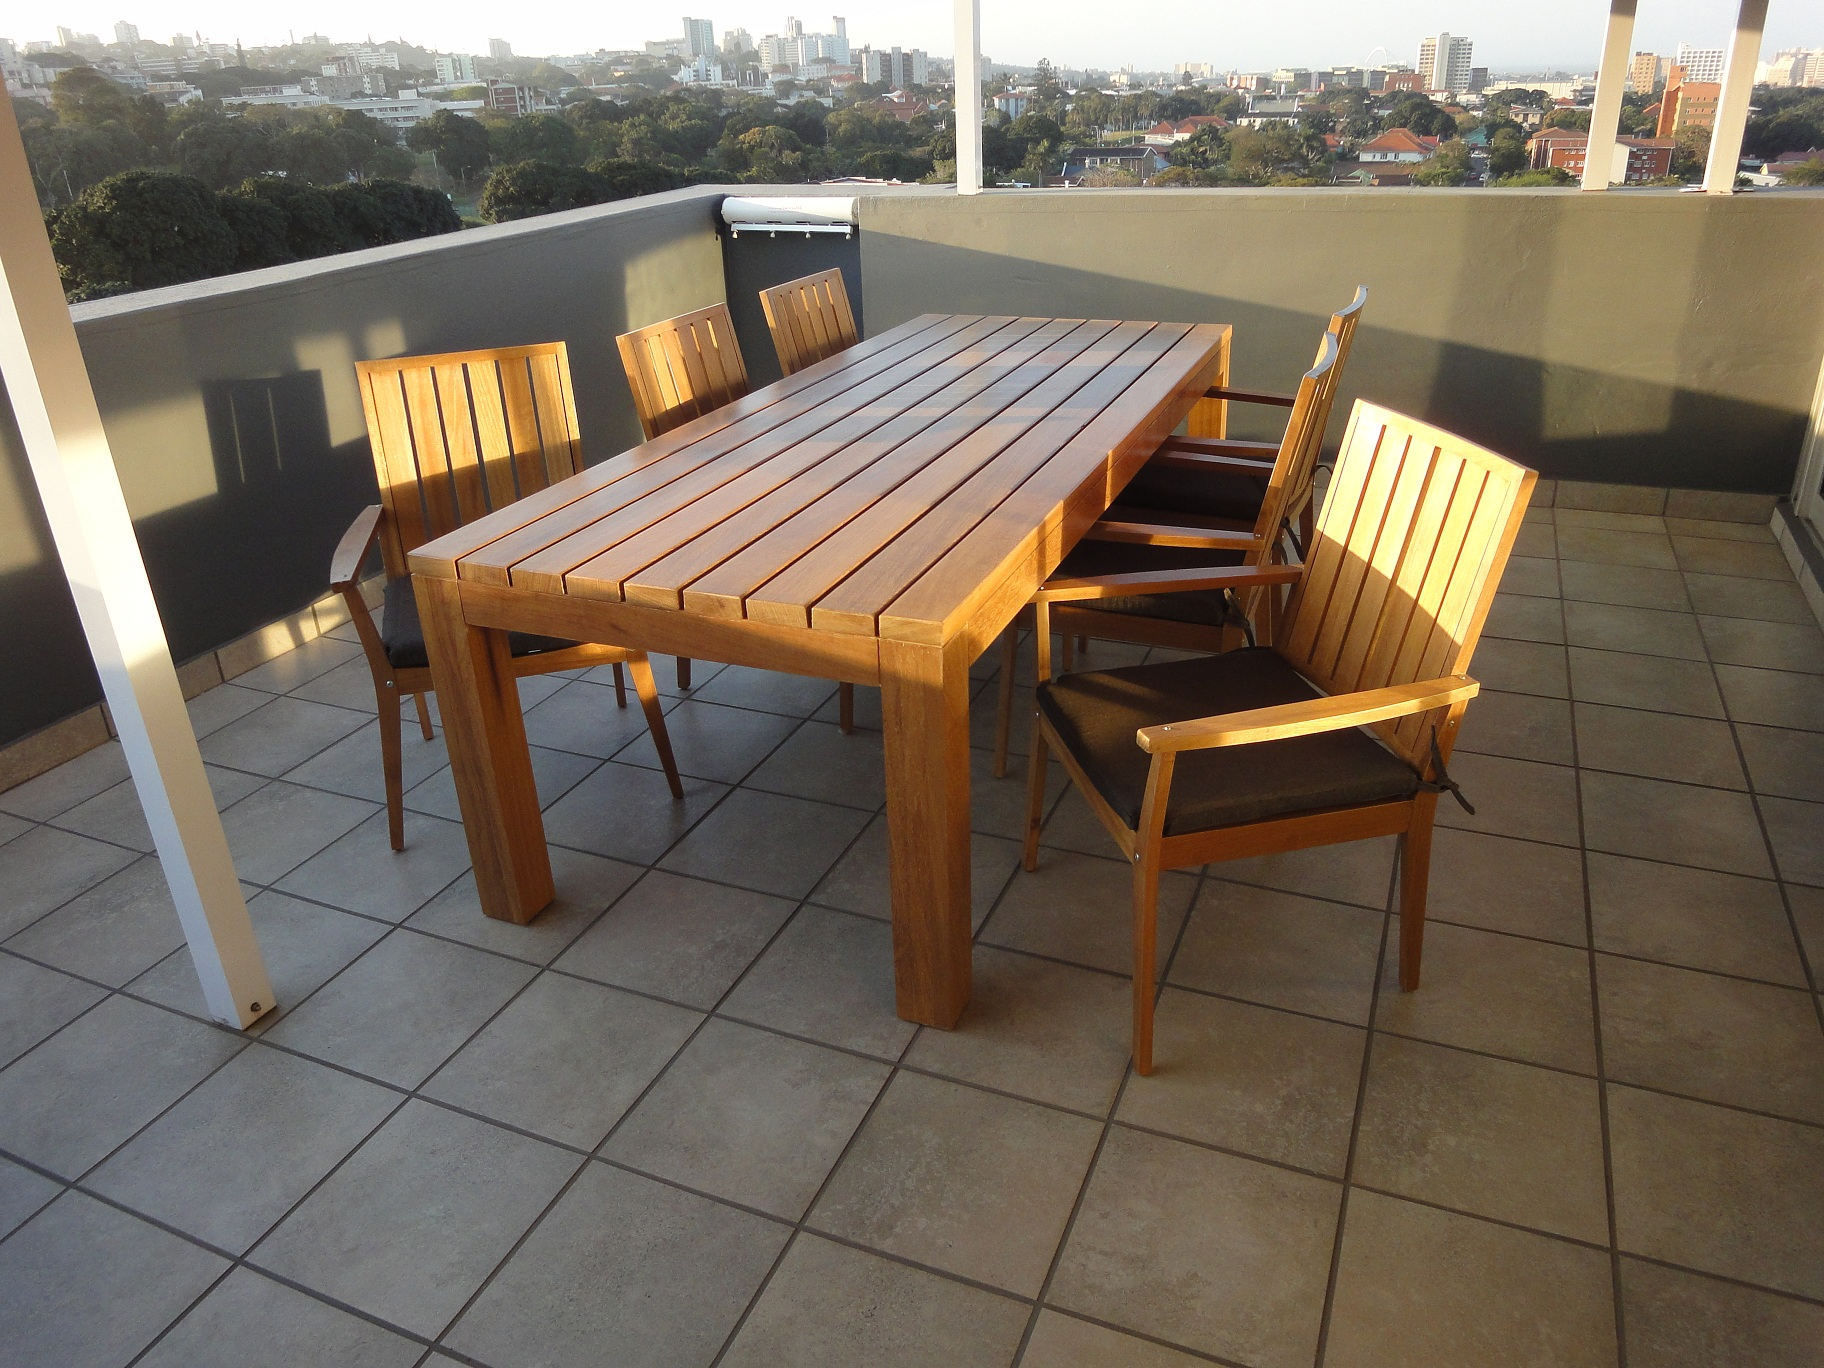 Iroko Outdoor Patio Table Chairs Suite Creative Woodworx throughout measurements 1824 X 1368